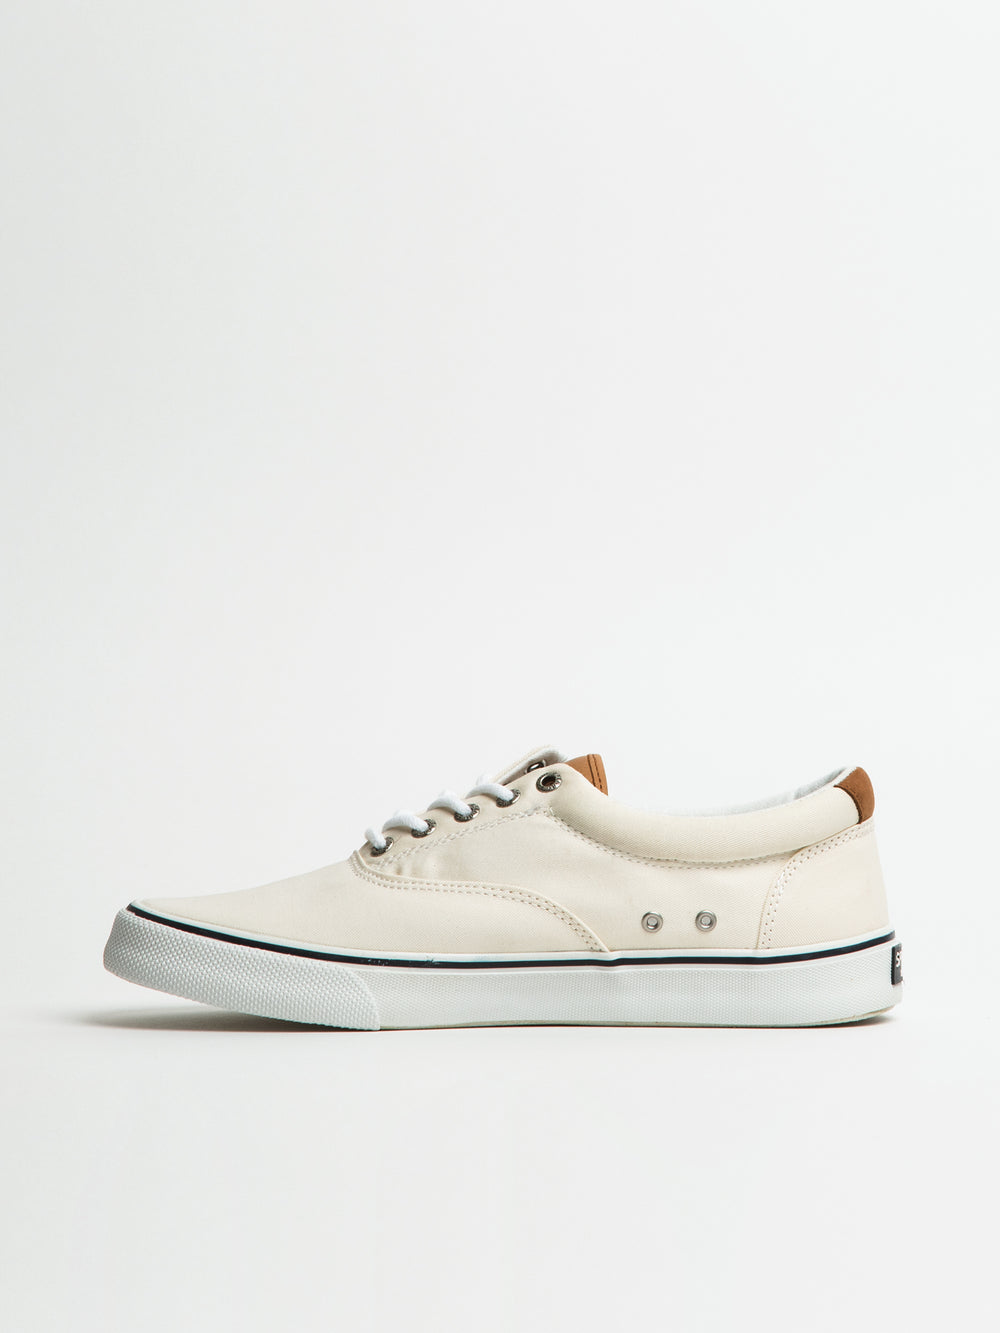 SPERRY STRIPER II CVO POUR HOMME